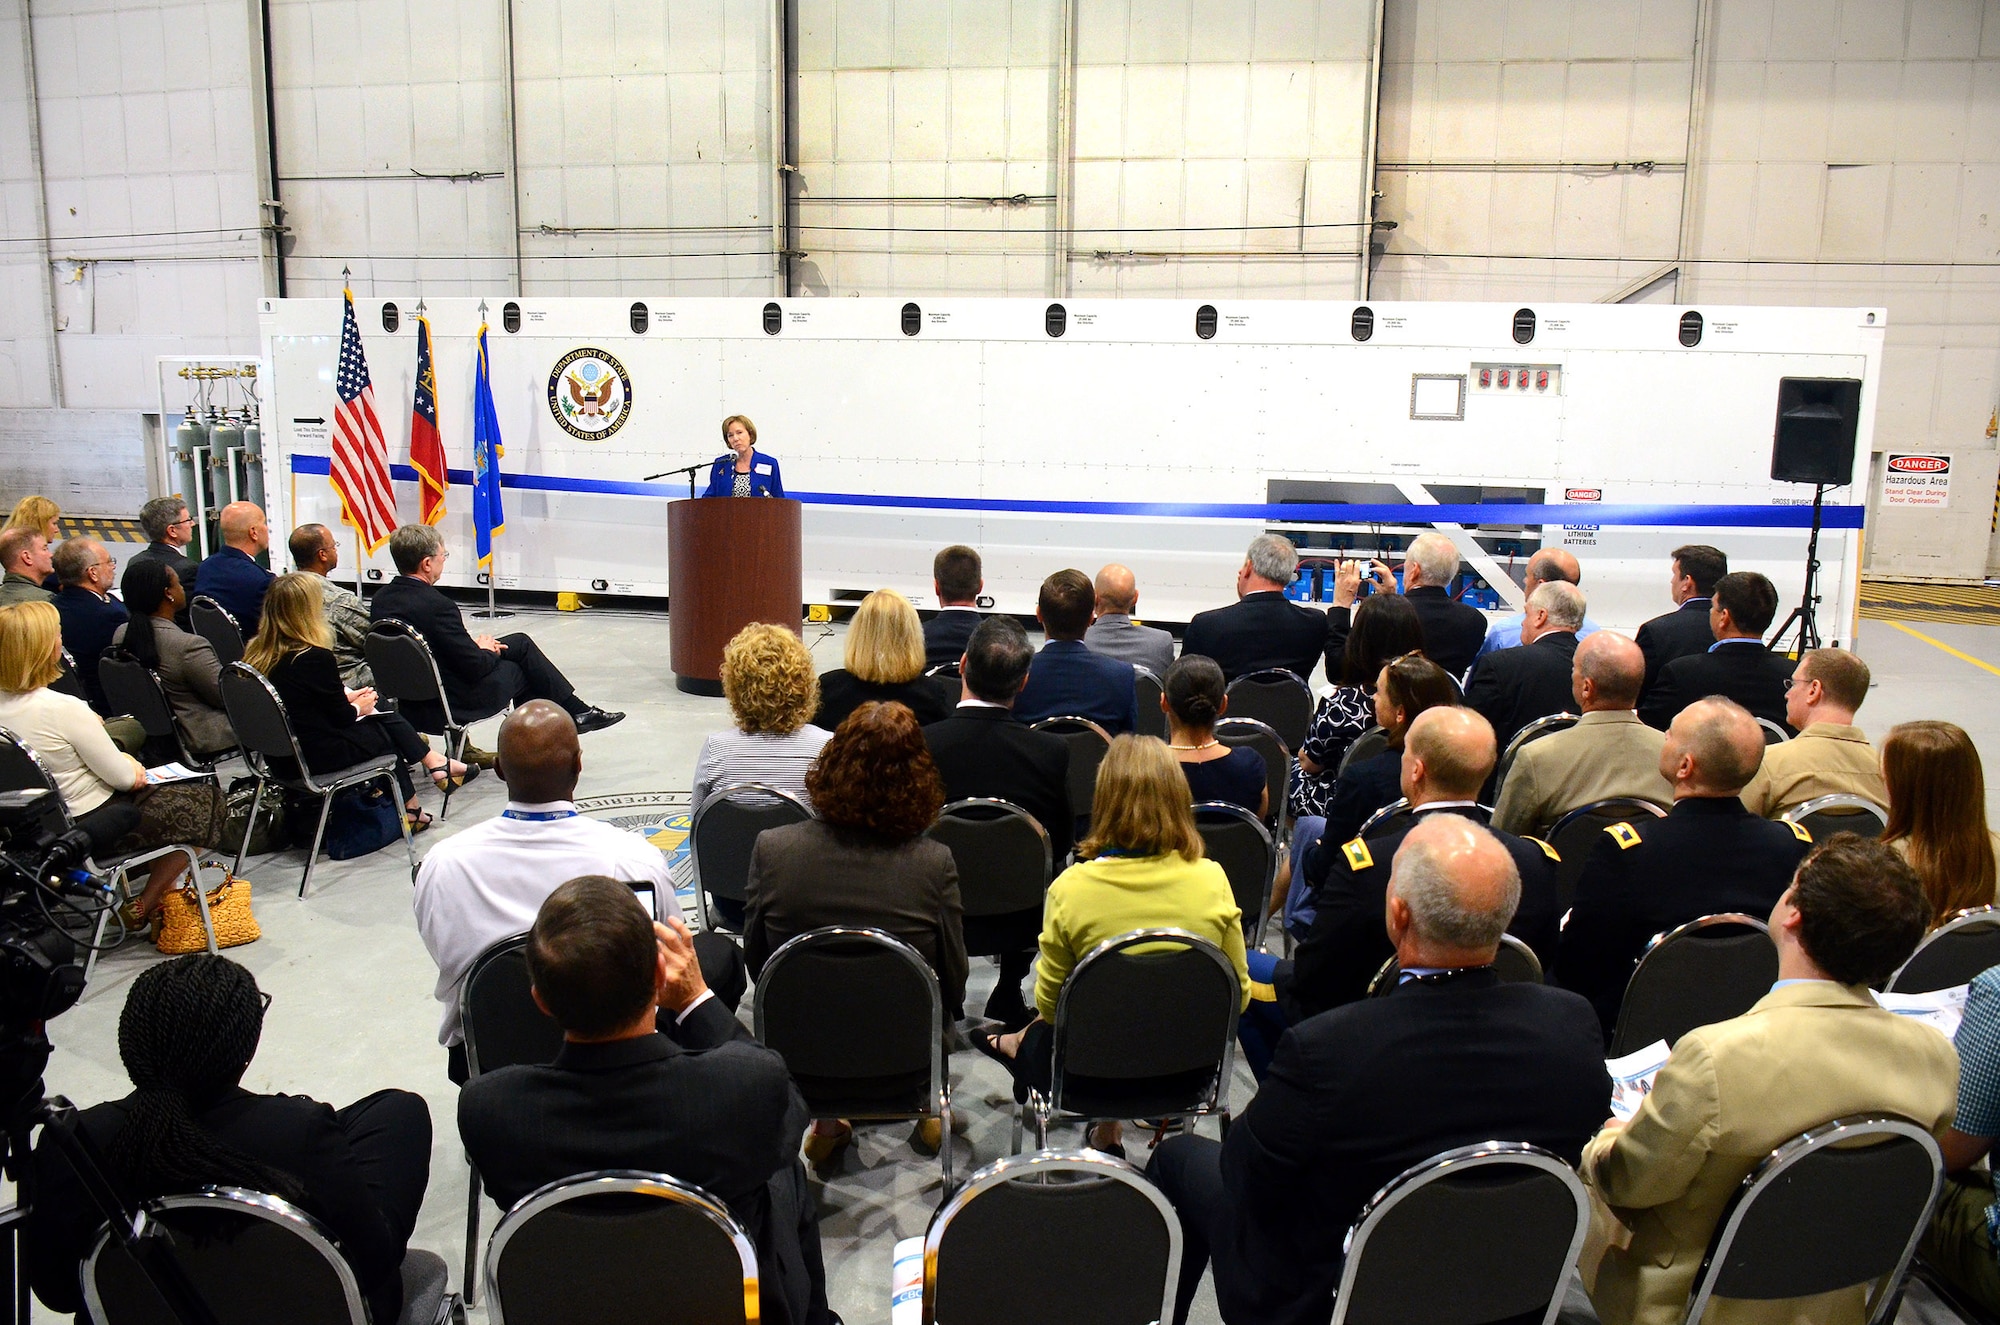 Barbara Bennett, president and chief operating officer Vulcan Inc., speaks at the unveiling of the US State Department sponsored Containerized Biocontainment Systems units at Dobbins Air Reserve Base, Ga., Aug. 11, 2015. The two Containerized Biocontainment units built by MRIGlobal through a partnership with the U.S. State Dept. and the Paul G. Allen Ebola Program, will be positioned at Dobbins ARB, ready for future. (U.S. Air Force photo/ Brad Fallin)